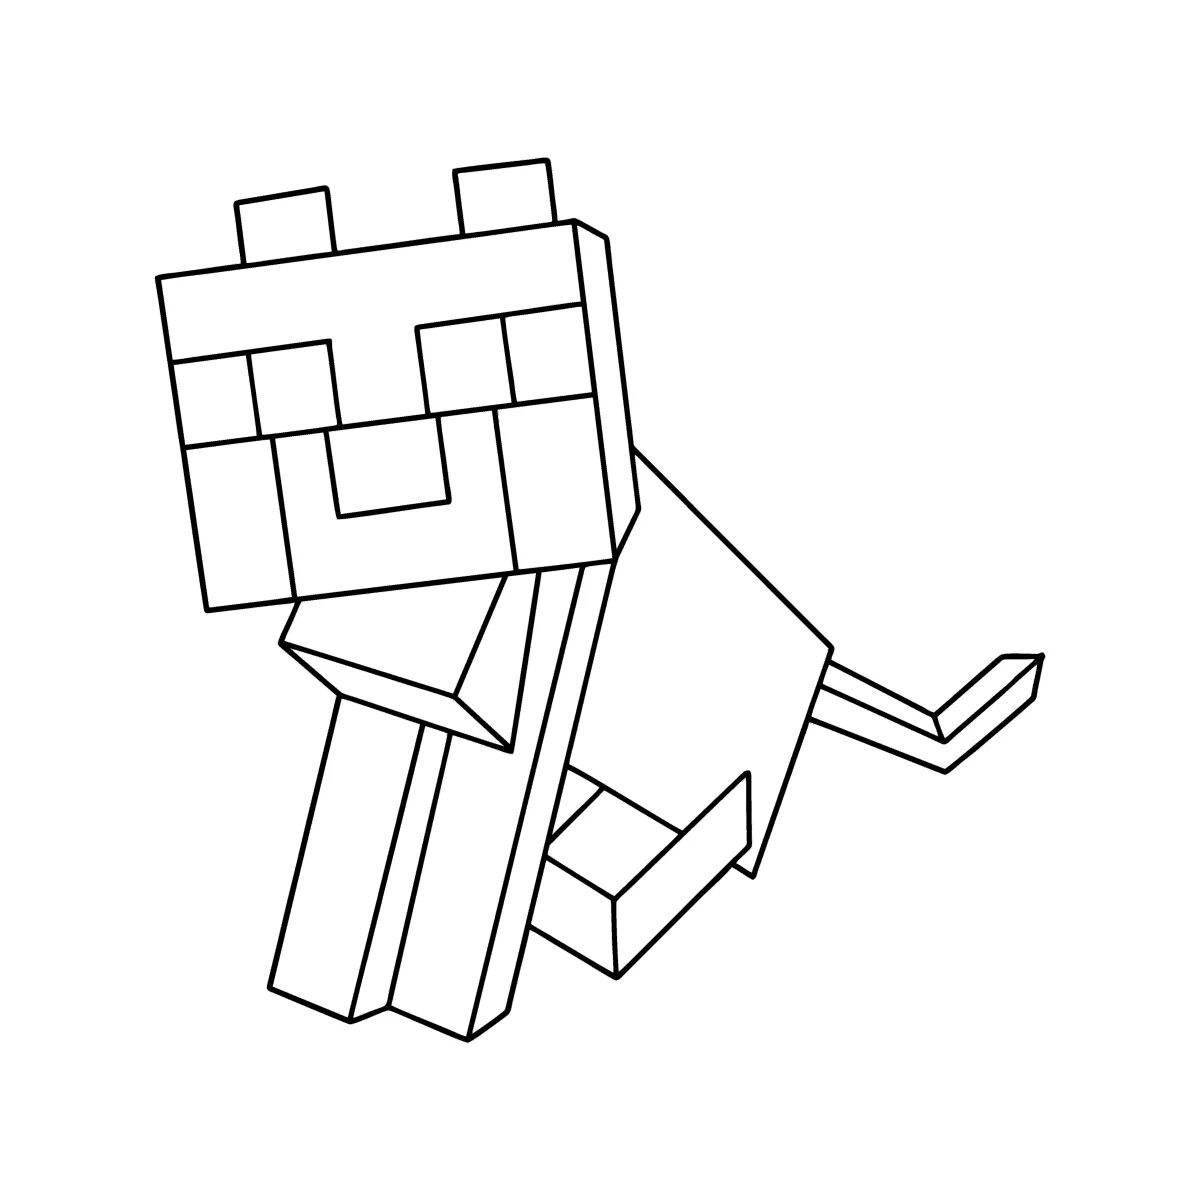 Adorable minecraft cat coloring page